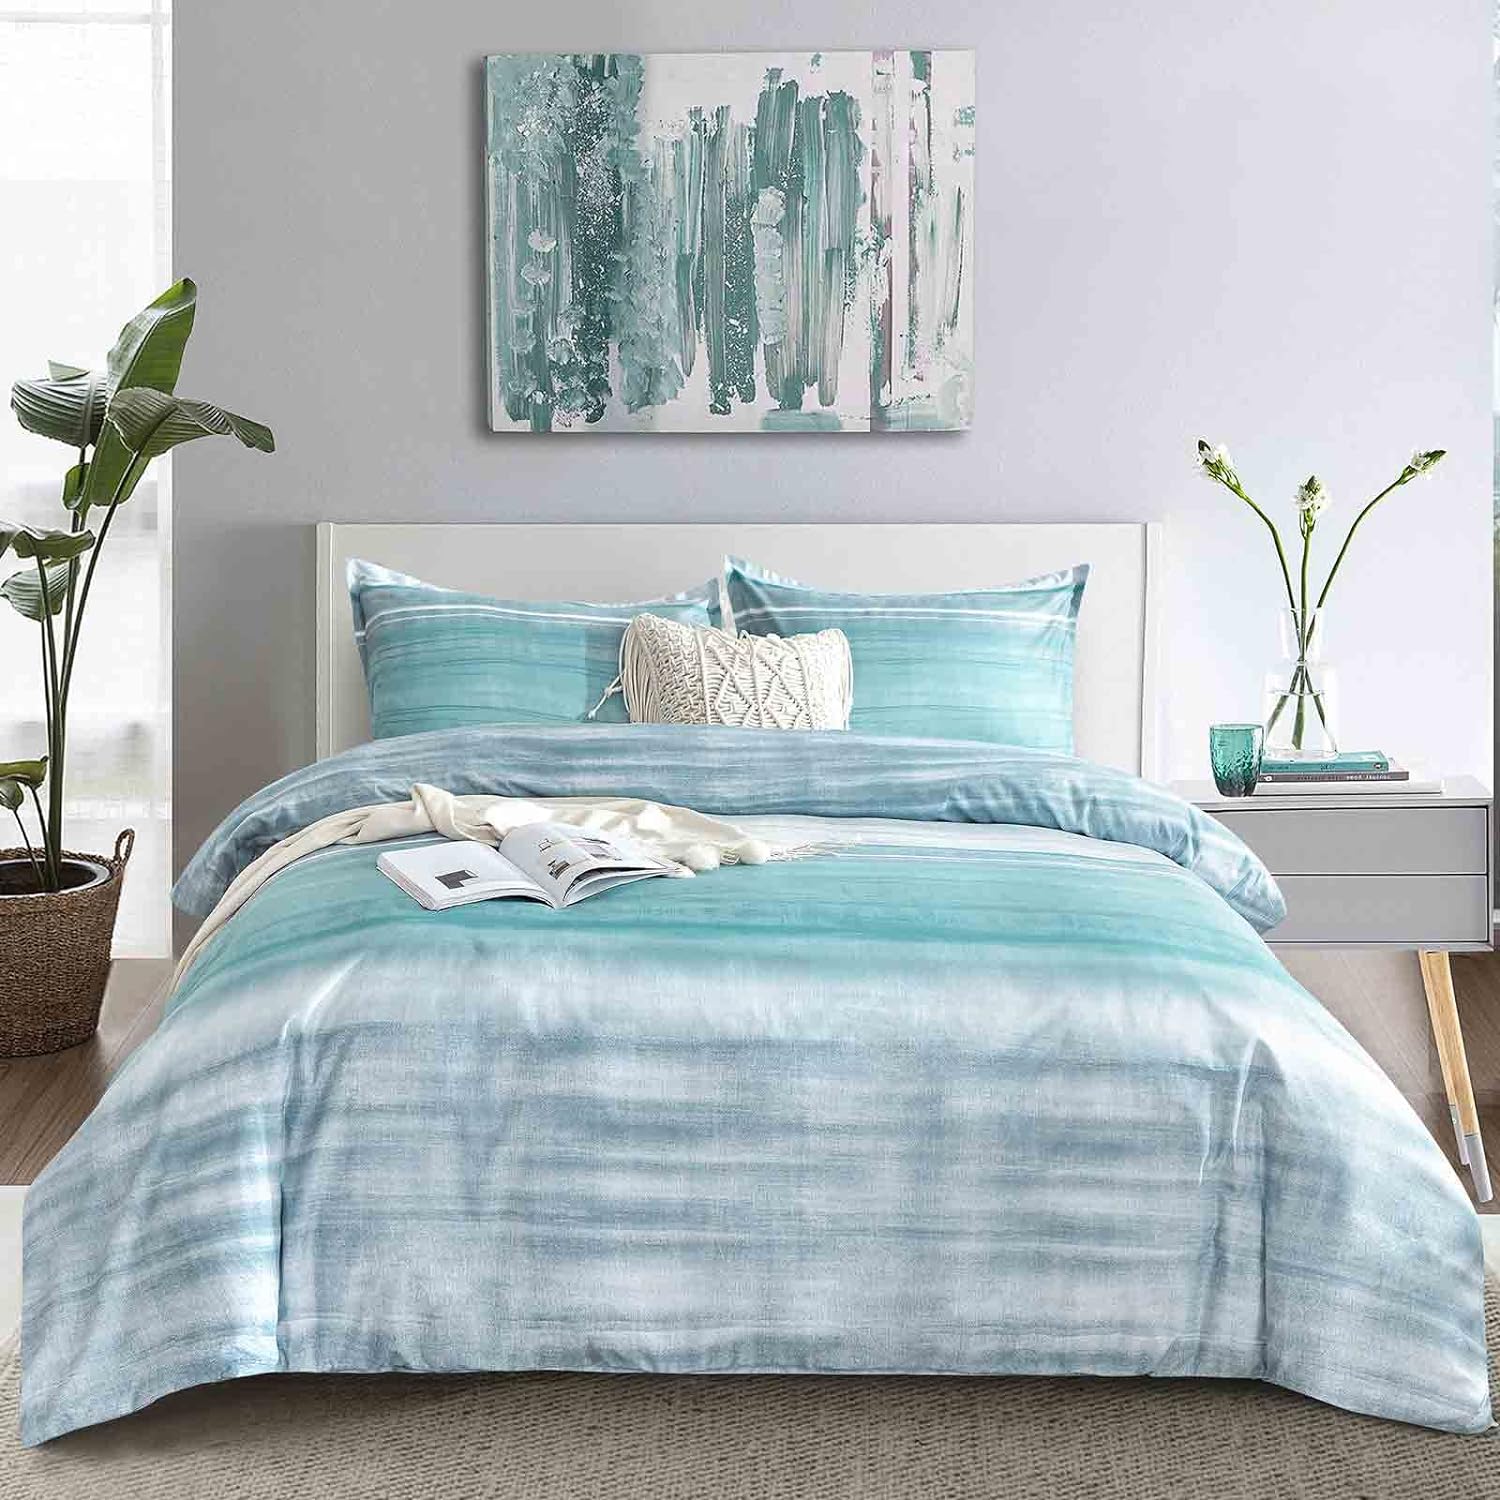 Blue Grey Striped King Size Duvet Cover - Teal and Gray Stripe Printed Pattern Reversible Microfiber Comforter Cover Bedding Sets - 3PC 104 x 90 Soft Bed Sets , Modern Abstract Style for Women Men